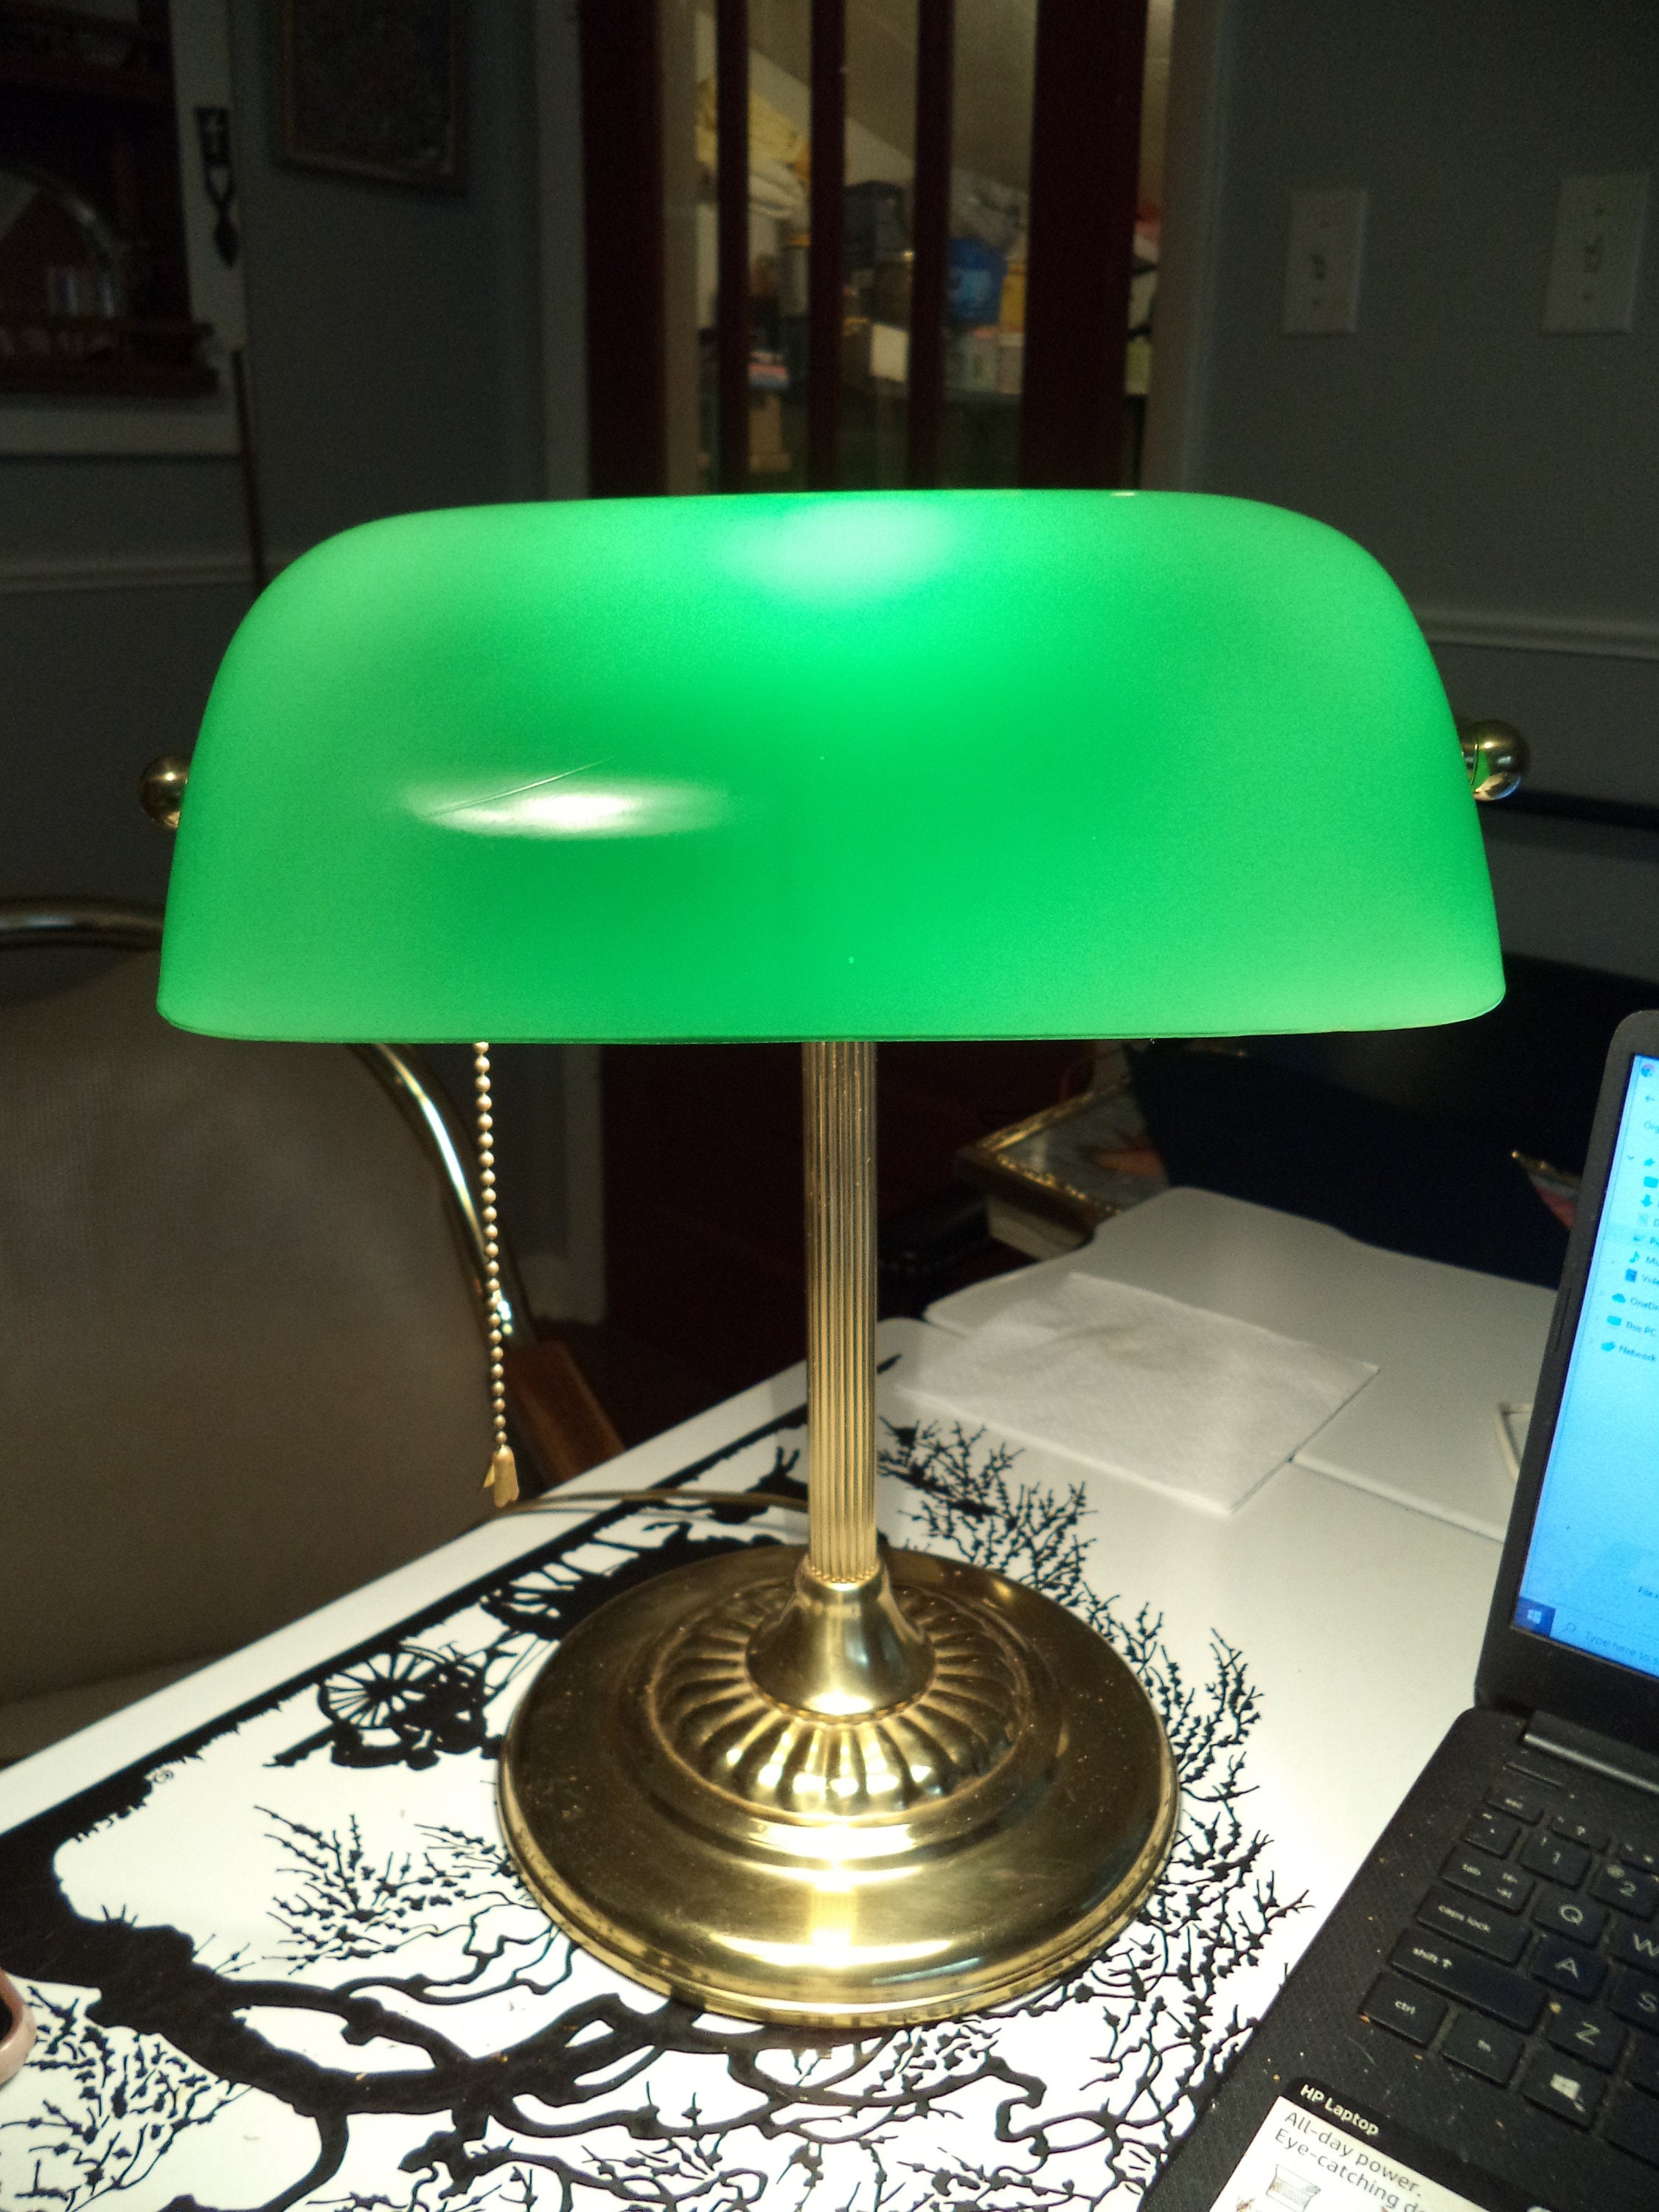 Solid Brass Bankers Lamp Art Deco Office Desktop Green Glass Shade England  Library University Classic Mantique Tiffany Gift Idea Him Her -  Canada